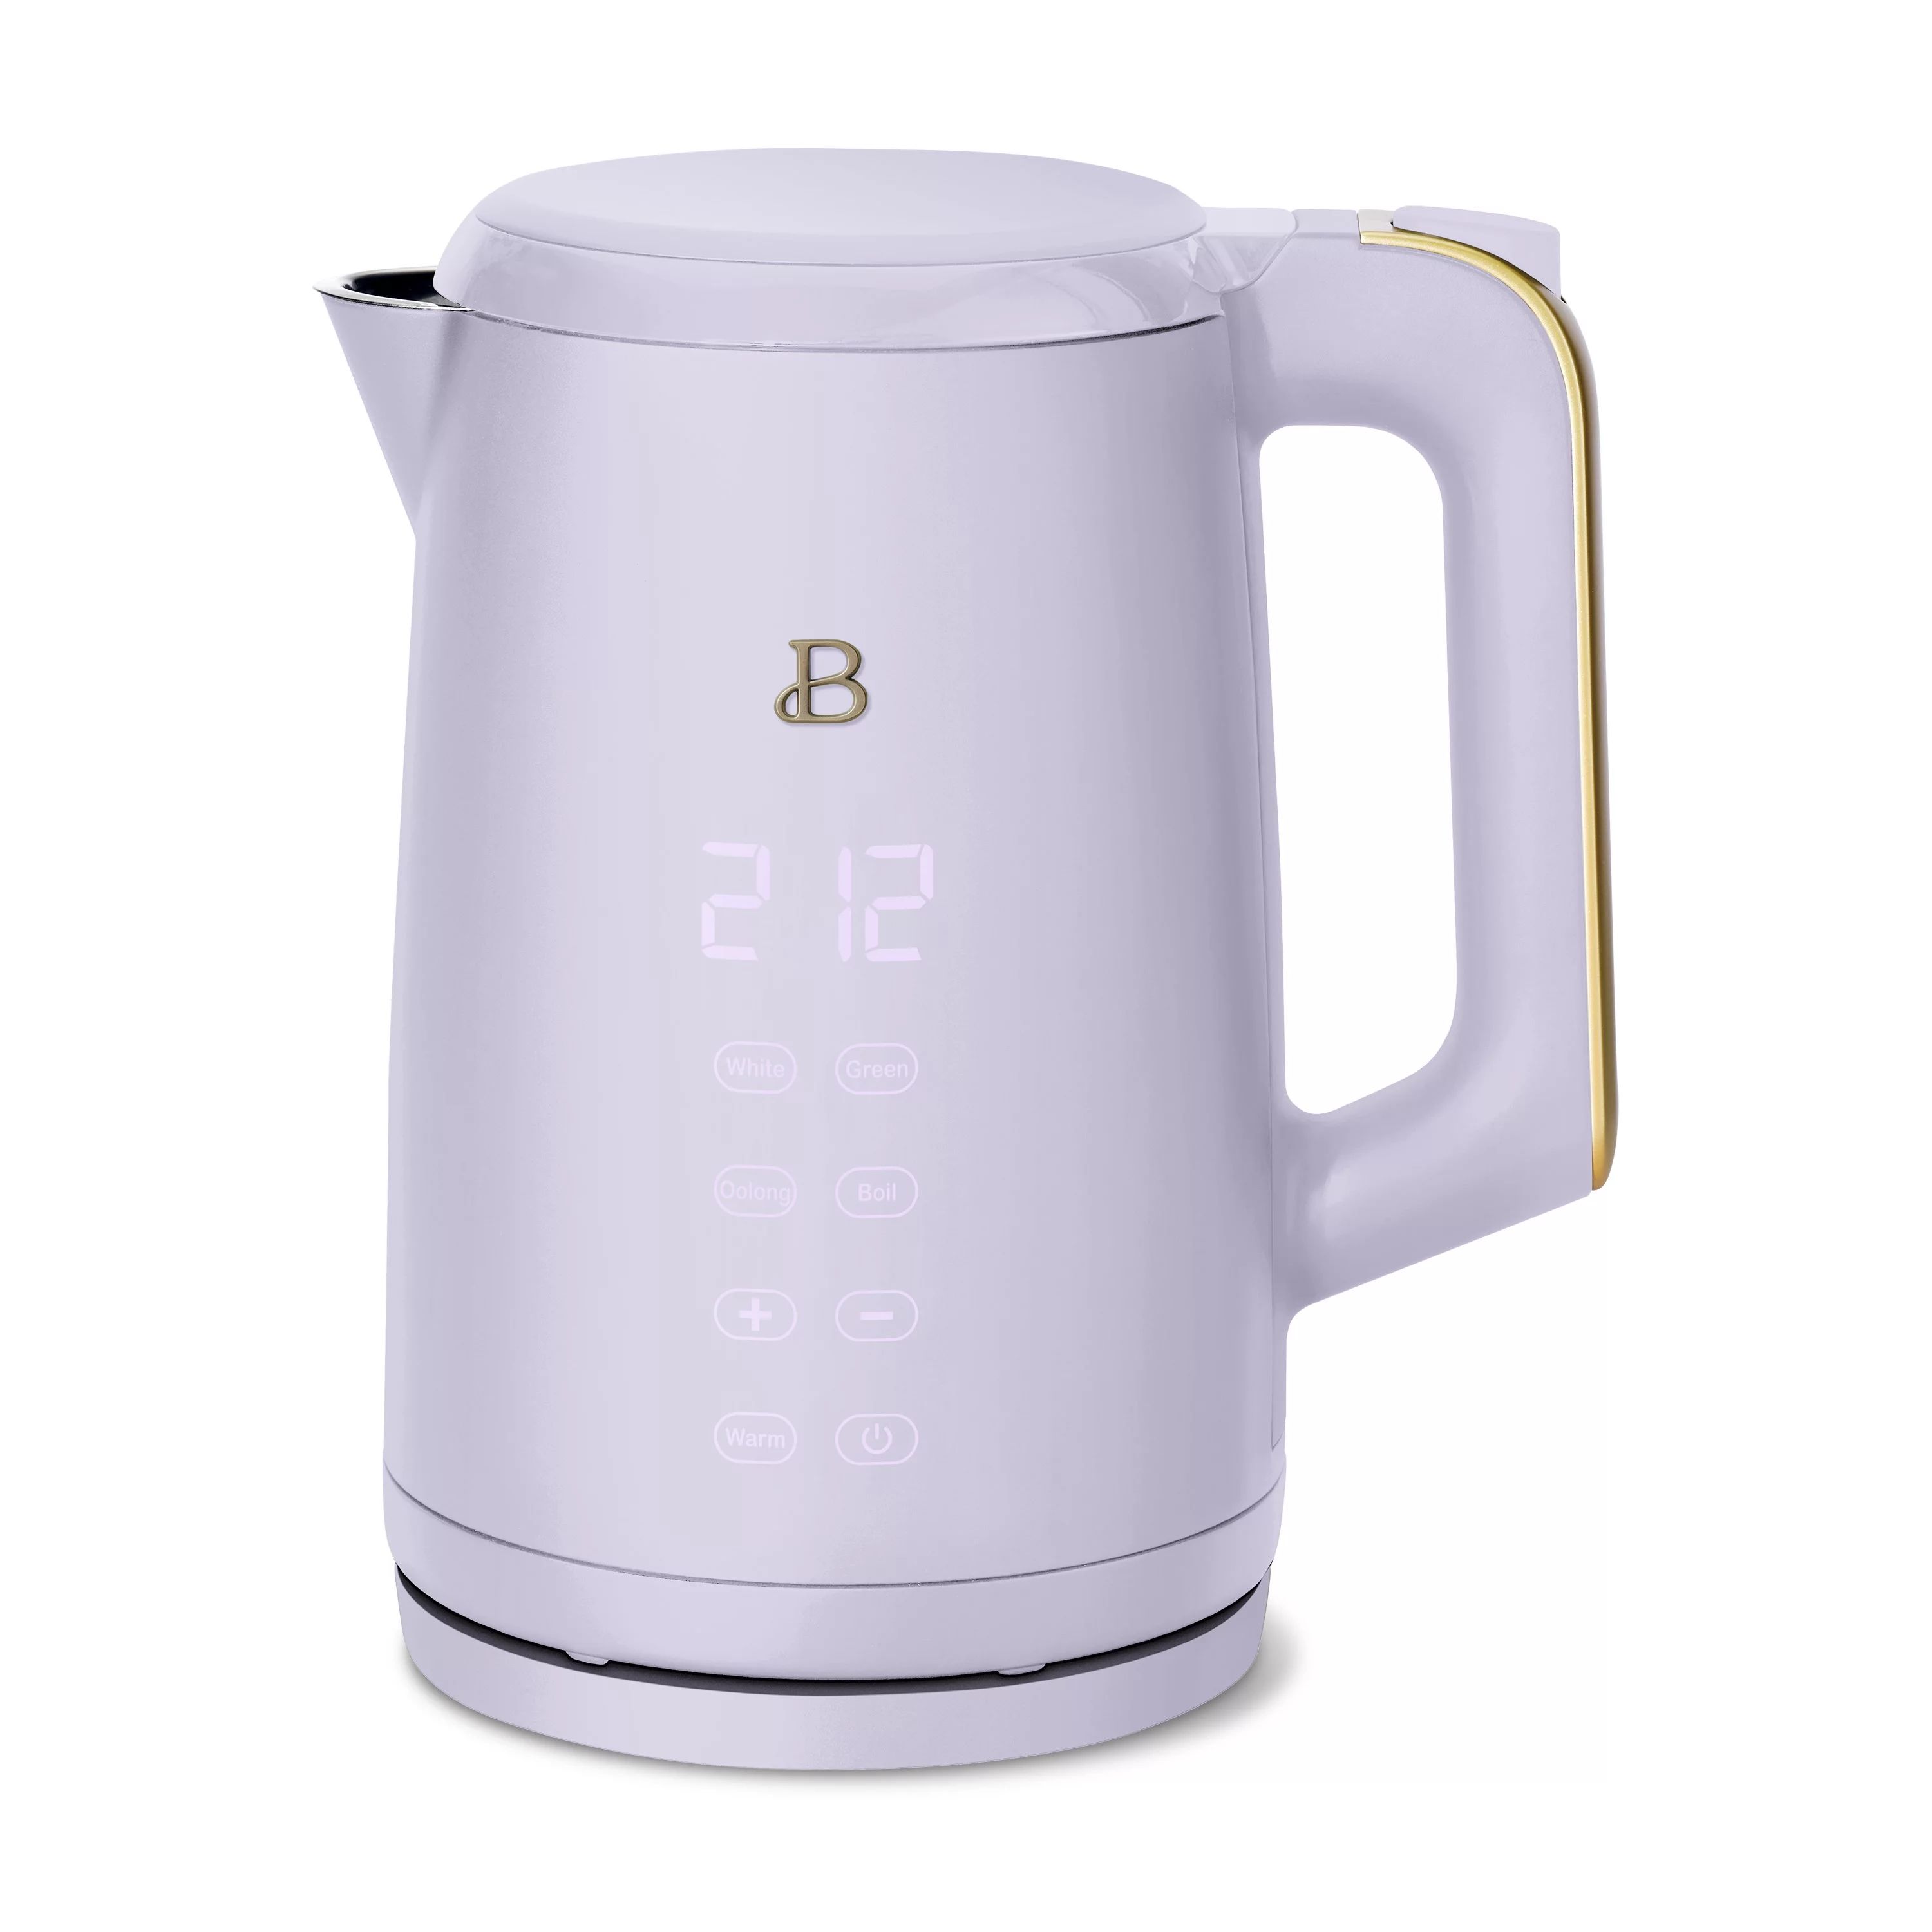 Beautiful 1.7-Liter Electric Kettle 1500 W with One-Touch Activation, Lavender by Drew Barrymore | Walmart (US)